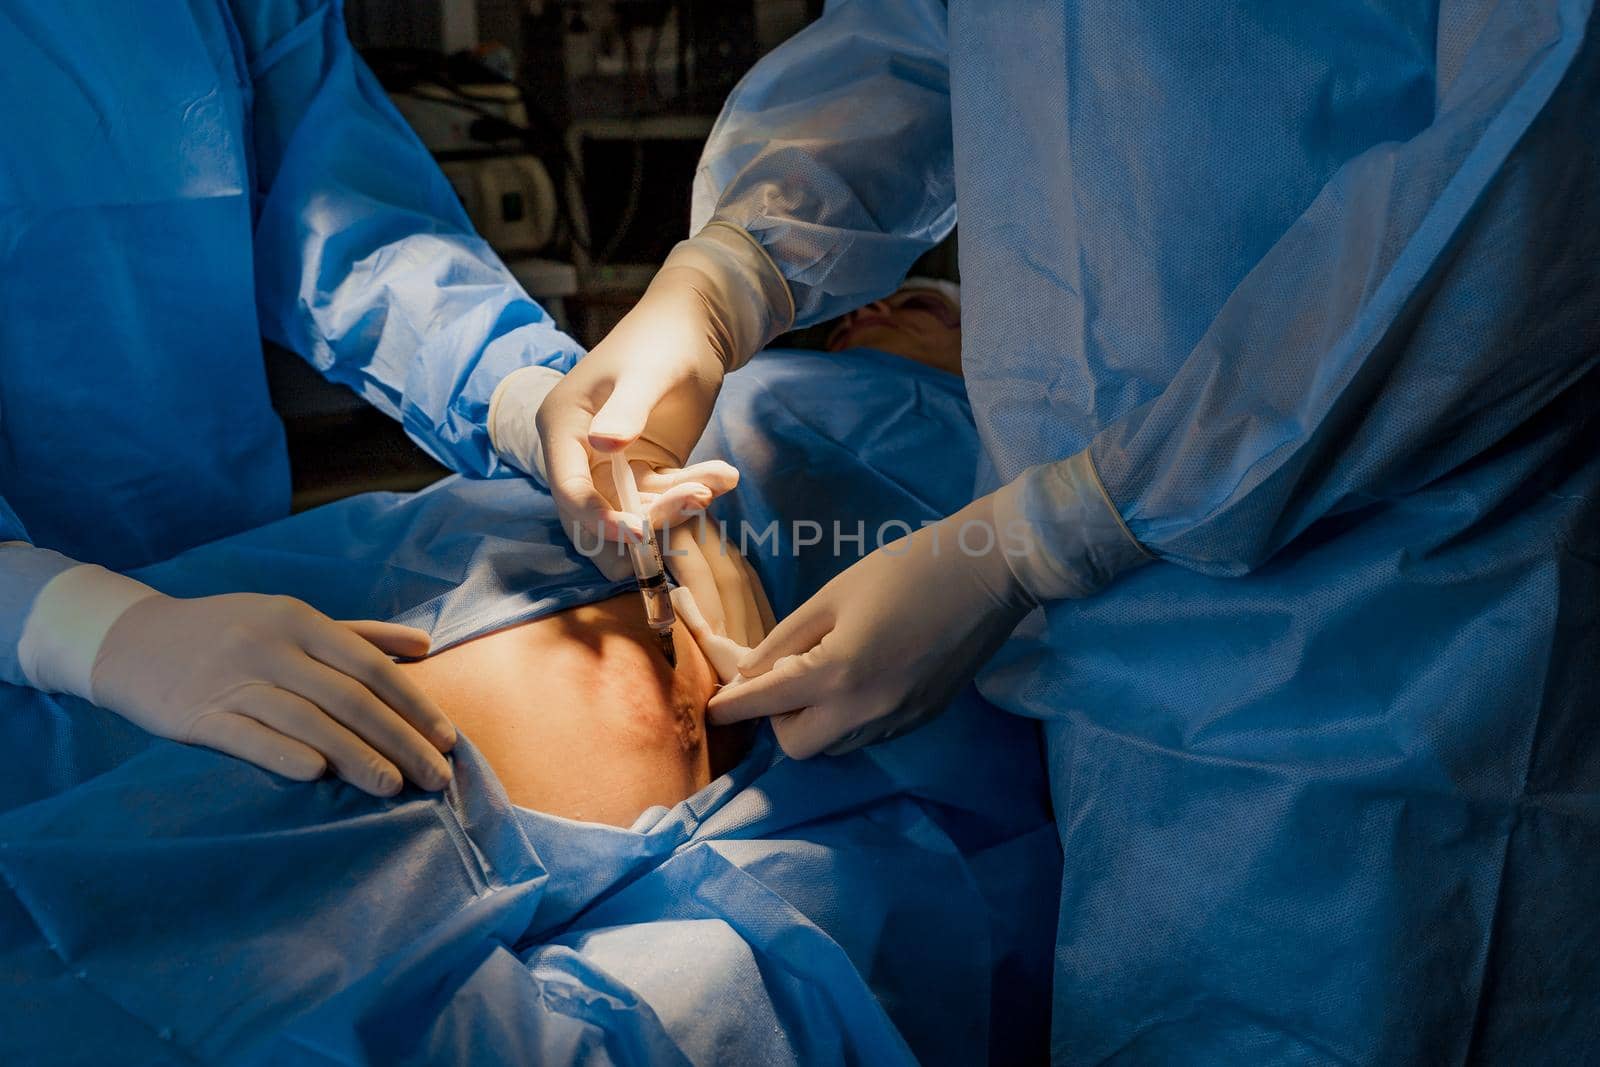 Close-up anesthesia thigh injection before blepharoplasty and lipofilling plastic surgery operation for modifying the eye region of the face